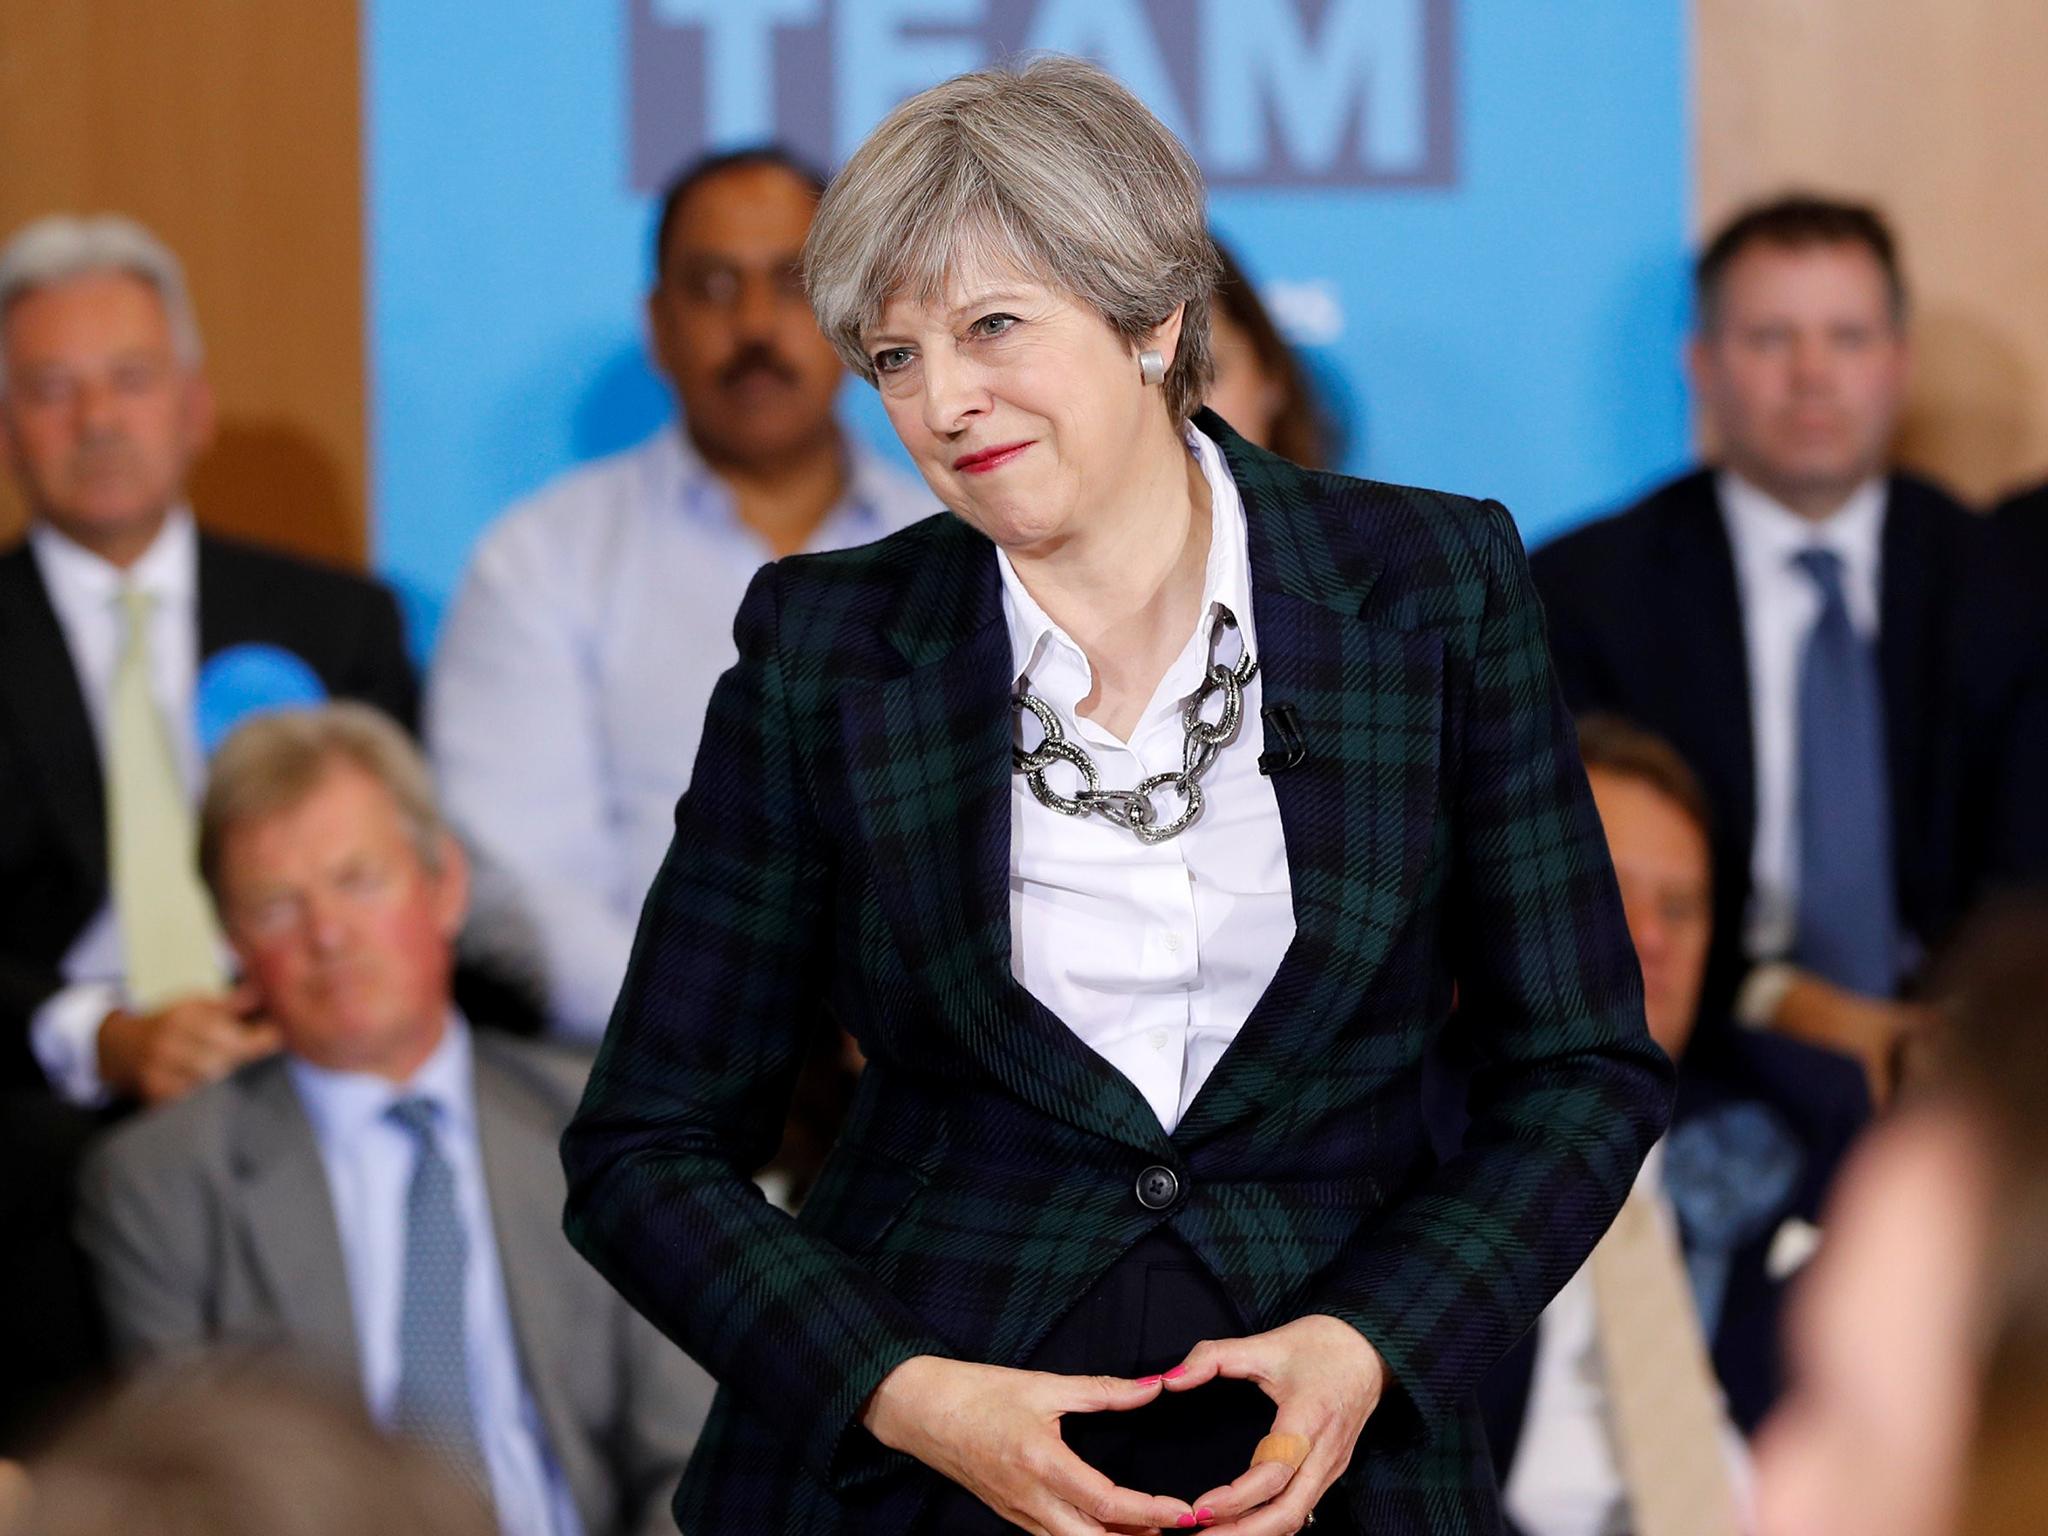 Theresa May attending a campaign event in Nottingham